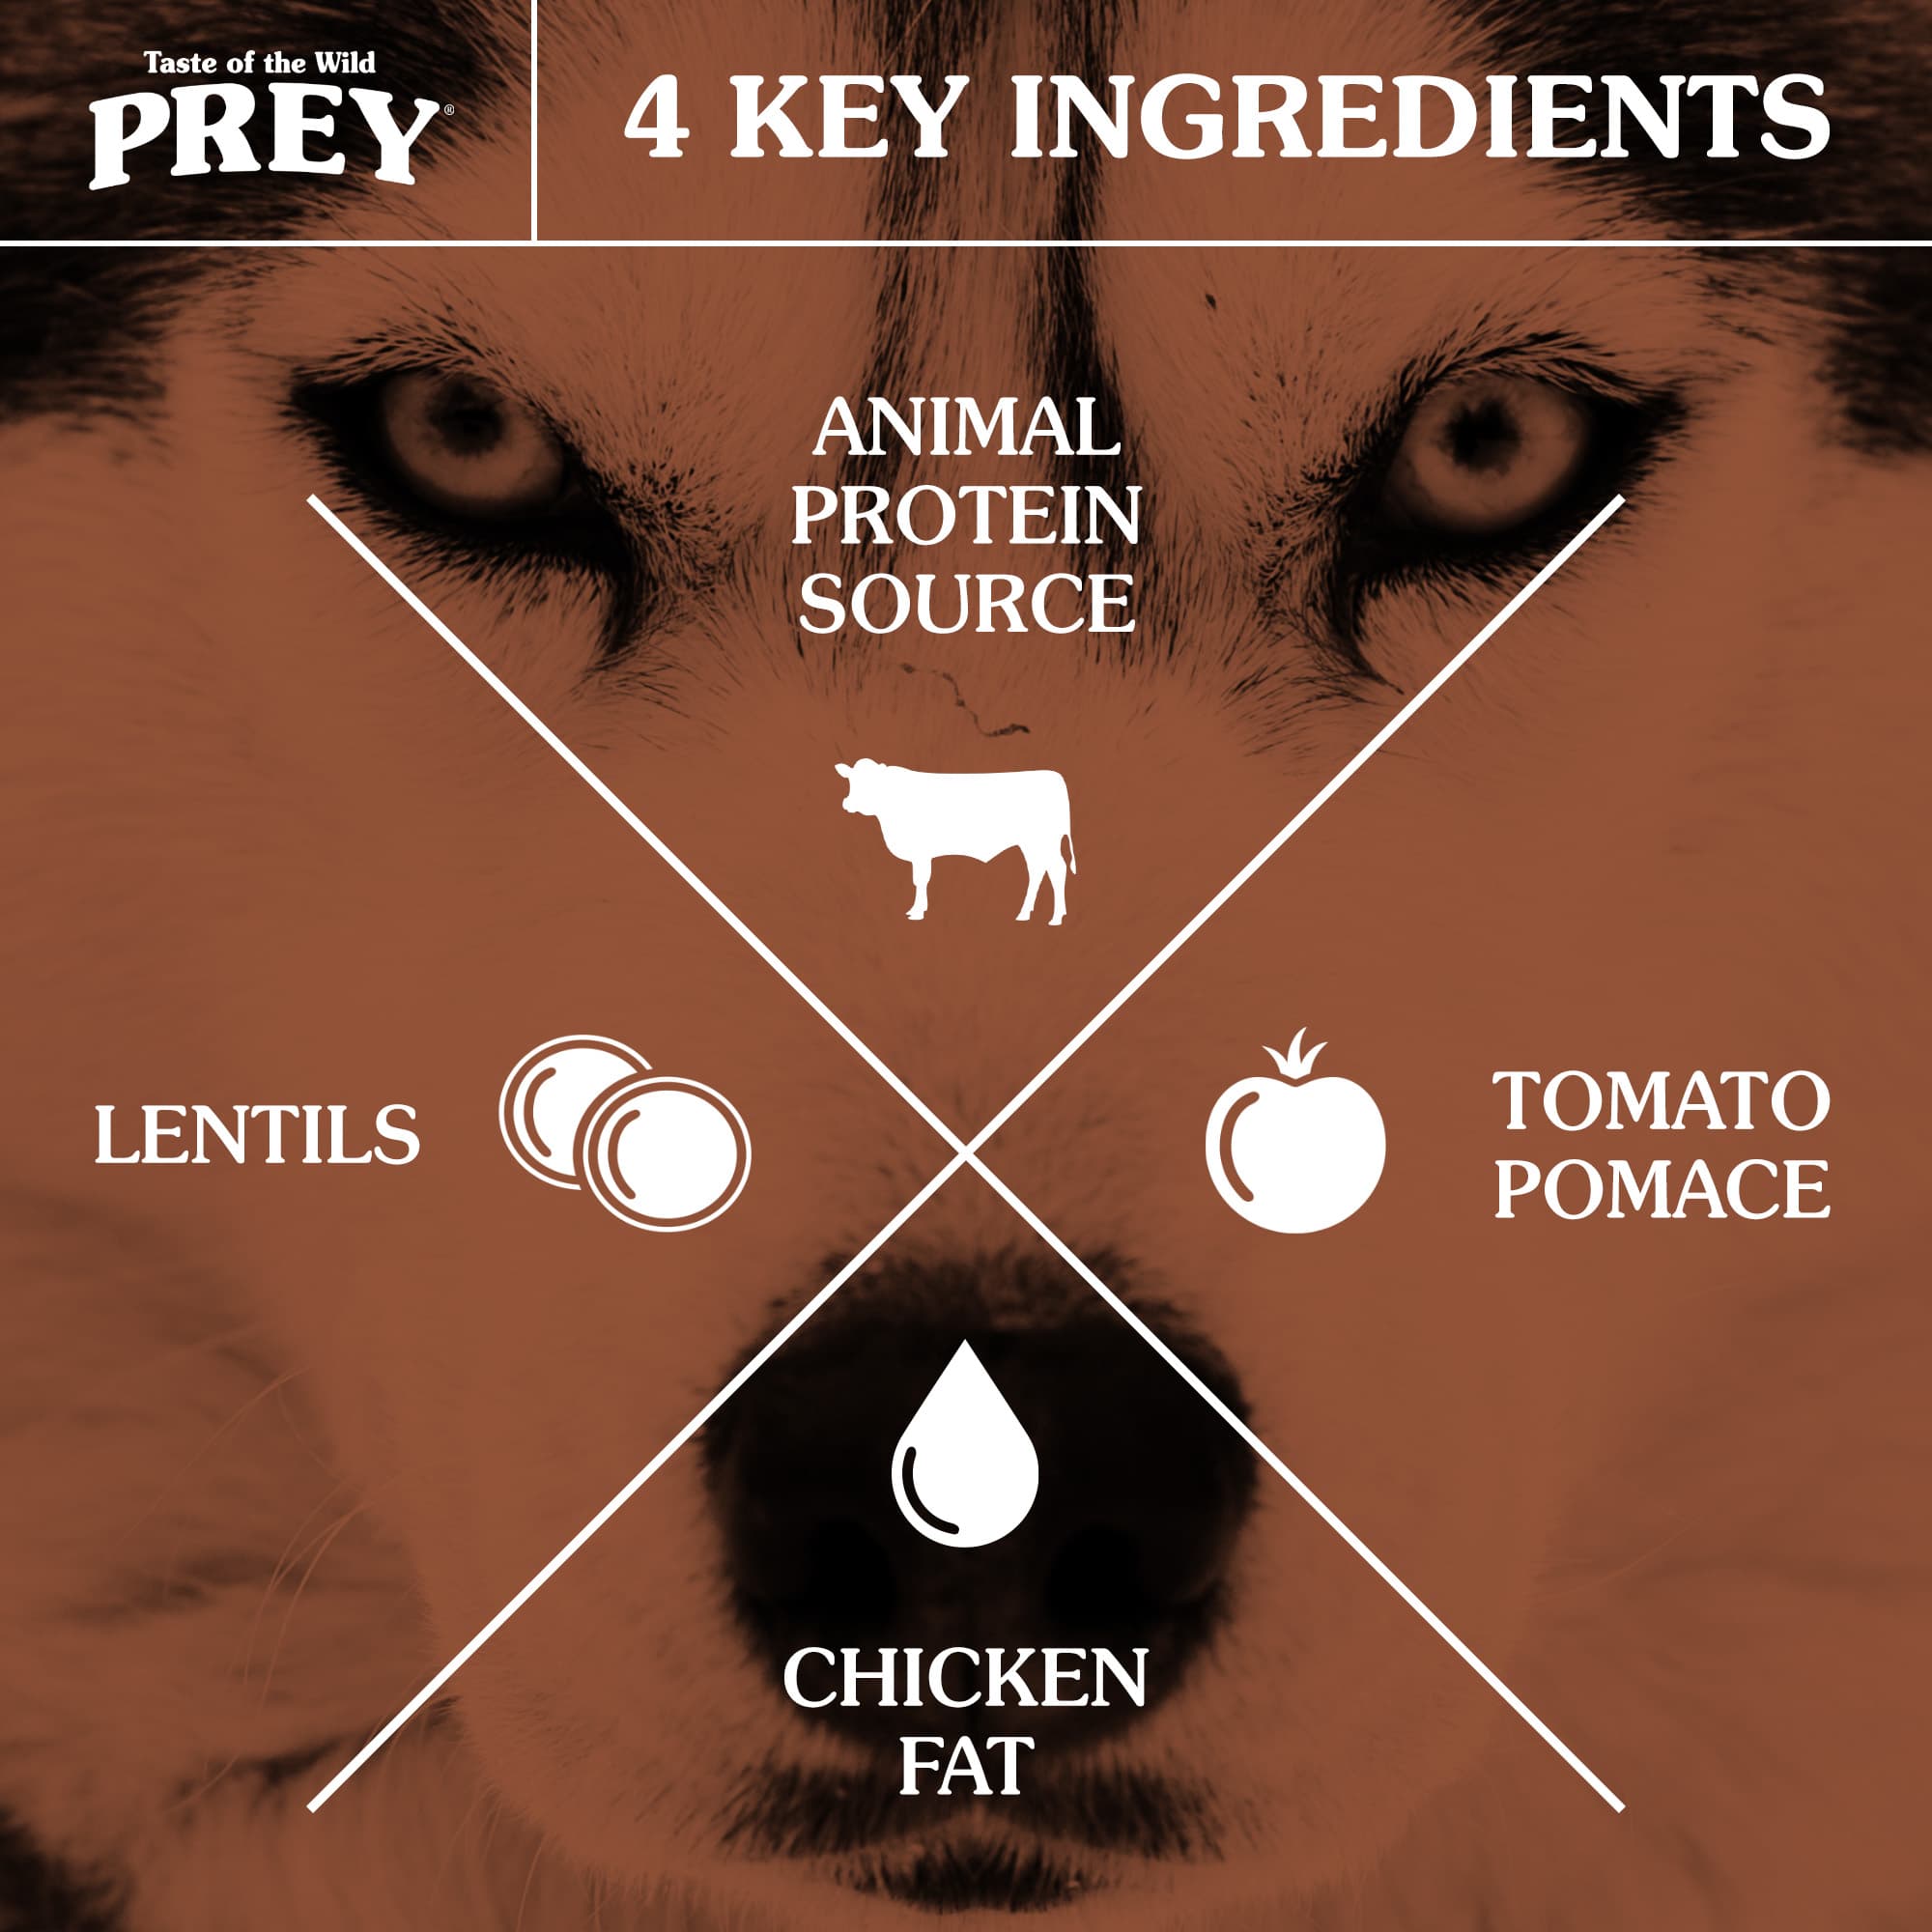 A wolf's face with an overlay graphic highlighting the four key ingredients of lentils, animal protein, tomato pomace and chicken fat.